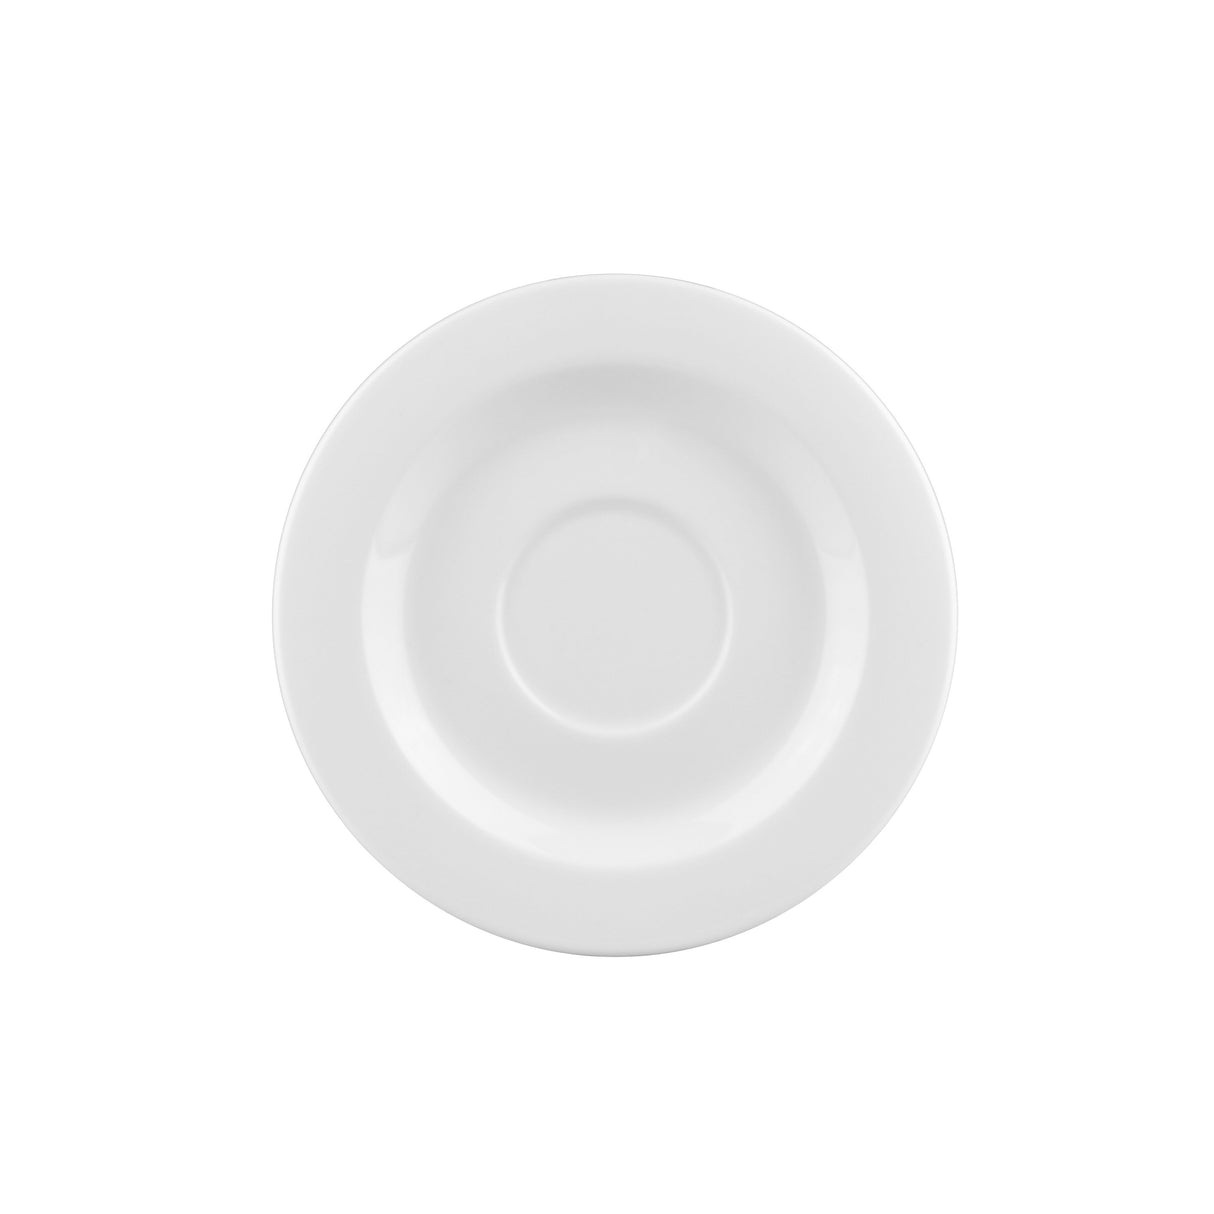 Standard Saucer - 160Mm, Ilona from Fortessa. made out of Bone China and sold in boxes of 24. Hospitality quality at wholesale price with The Flying Fork! 